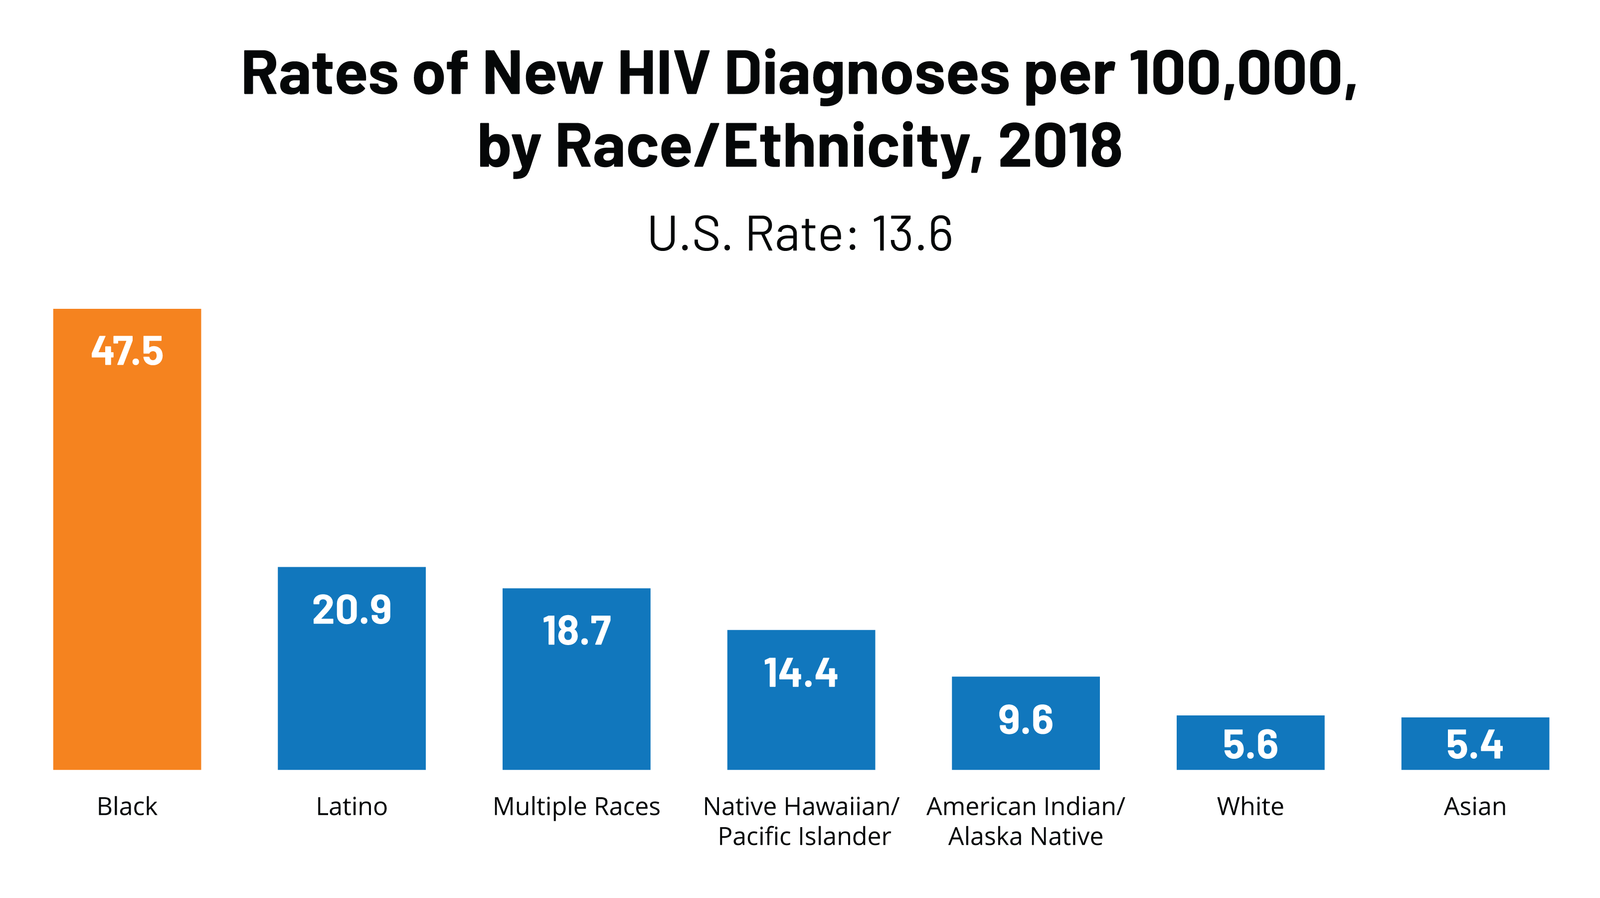 FEATURE-Rates-of-New-HIV-Diagnoses-in-2018-by-Ethnicity_1.png